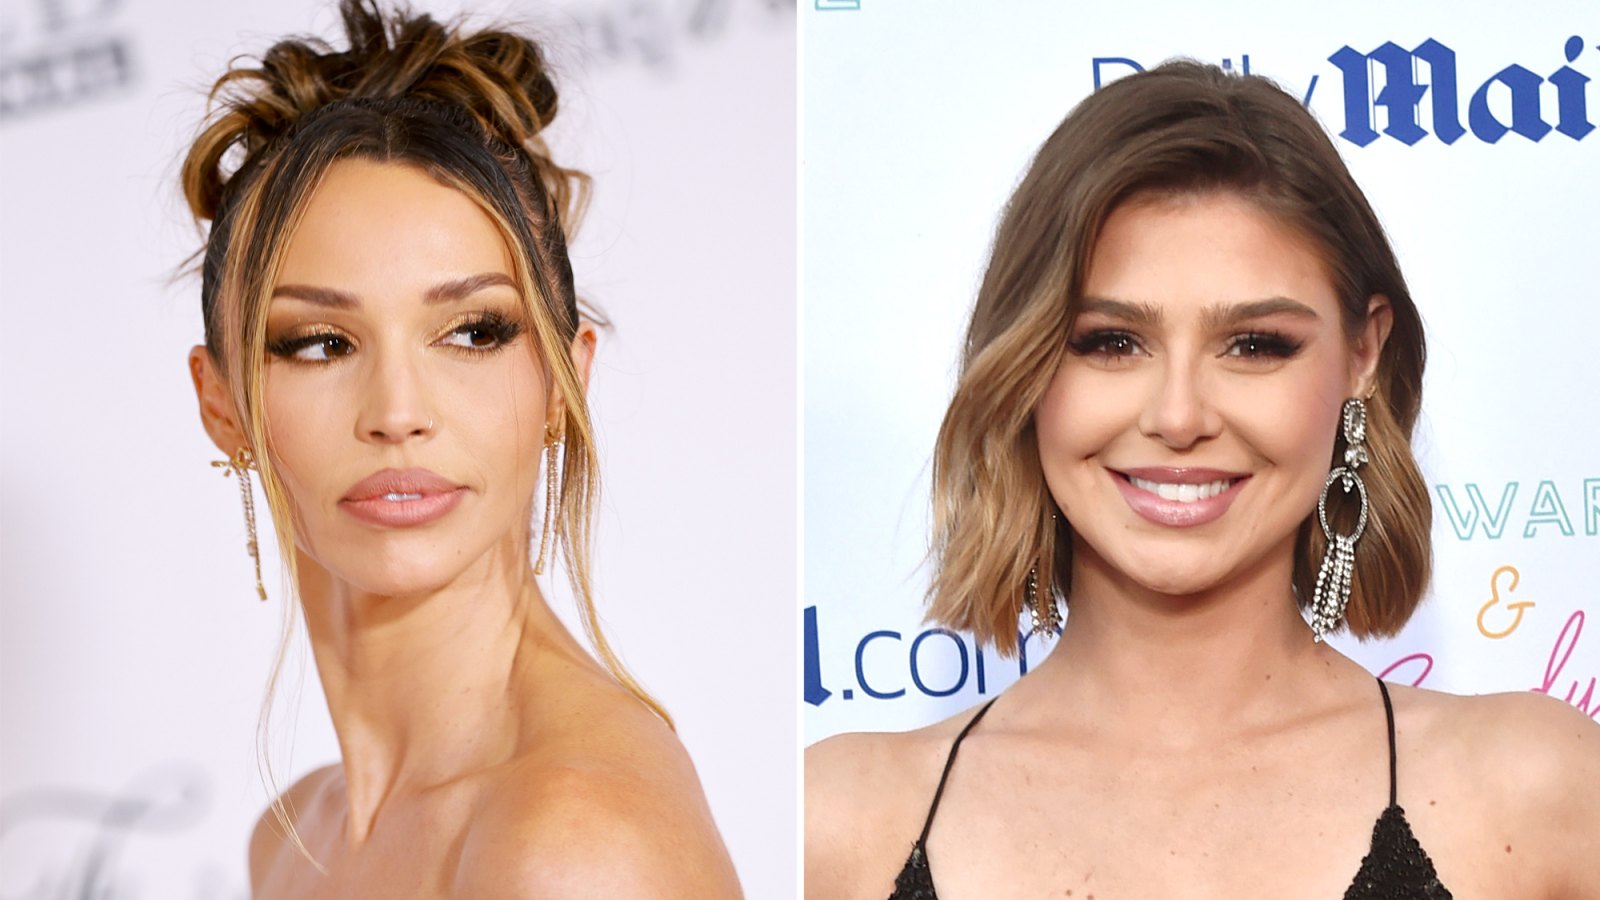 Scheana Shay Has a Theory About Why Raquel Leviss Broke Her Silence - and It Has to Do With the Emmys